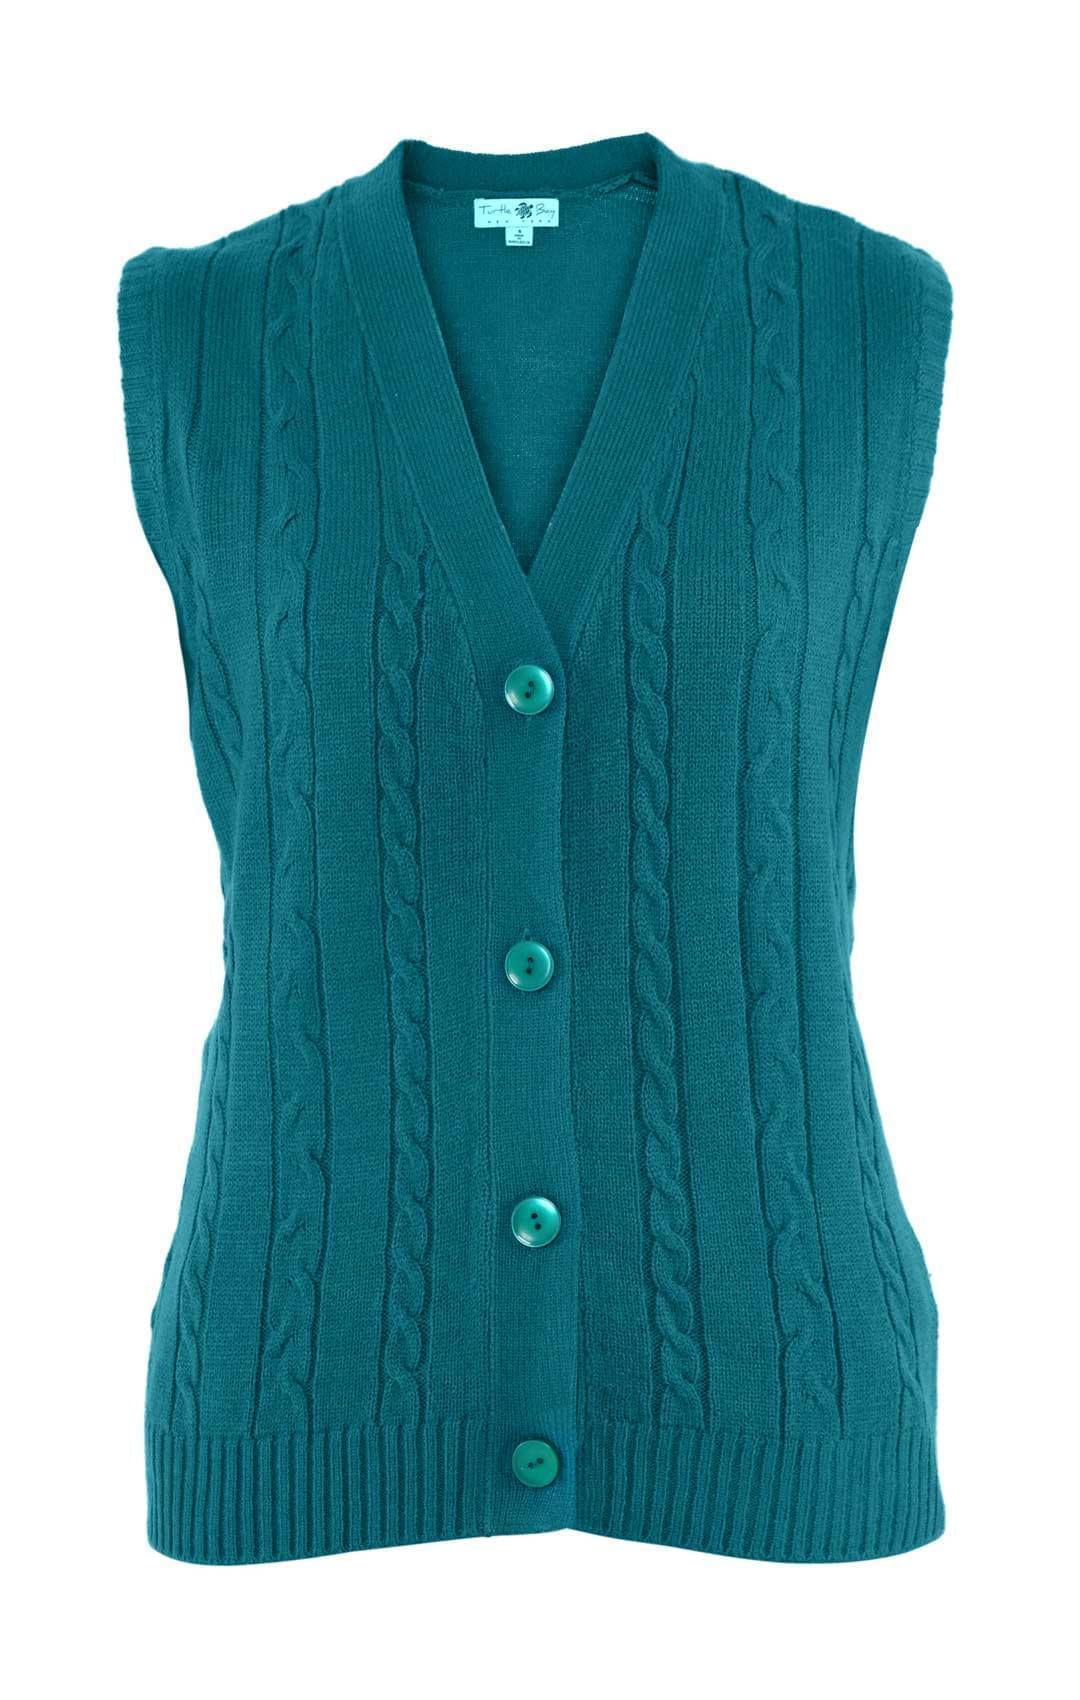 Women's Button Front Cable Cardigan Sweater Vest - Button Up 